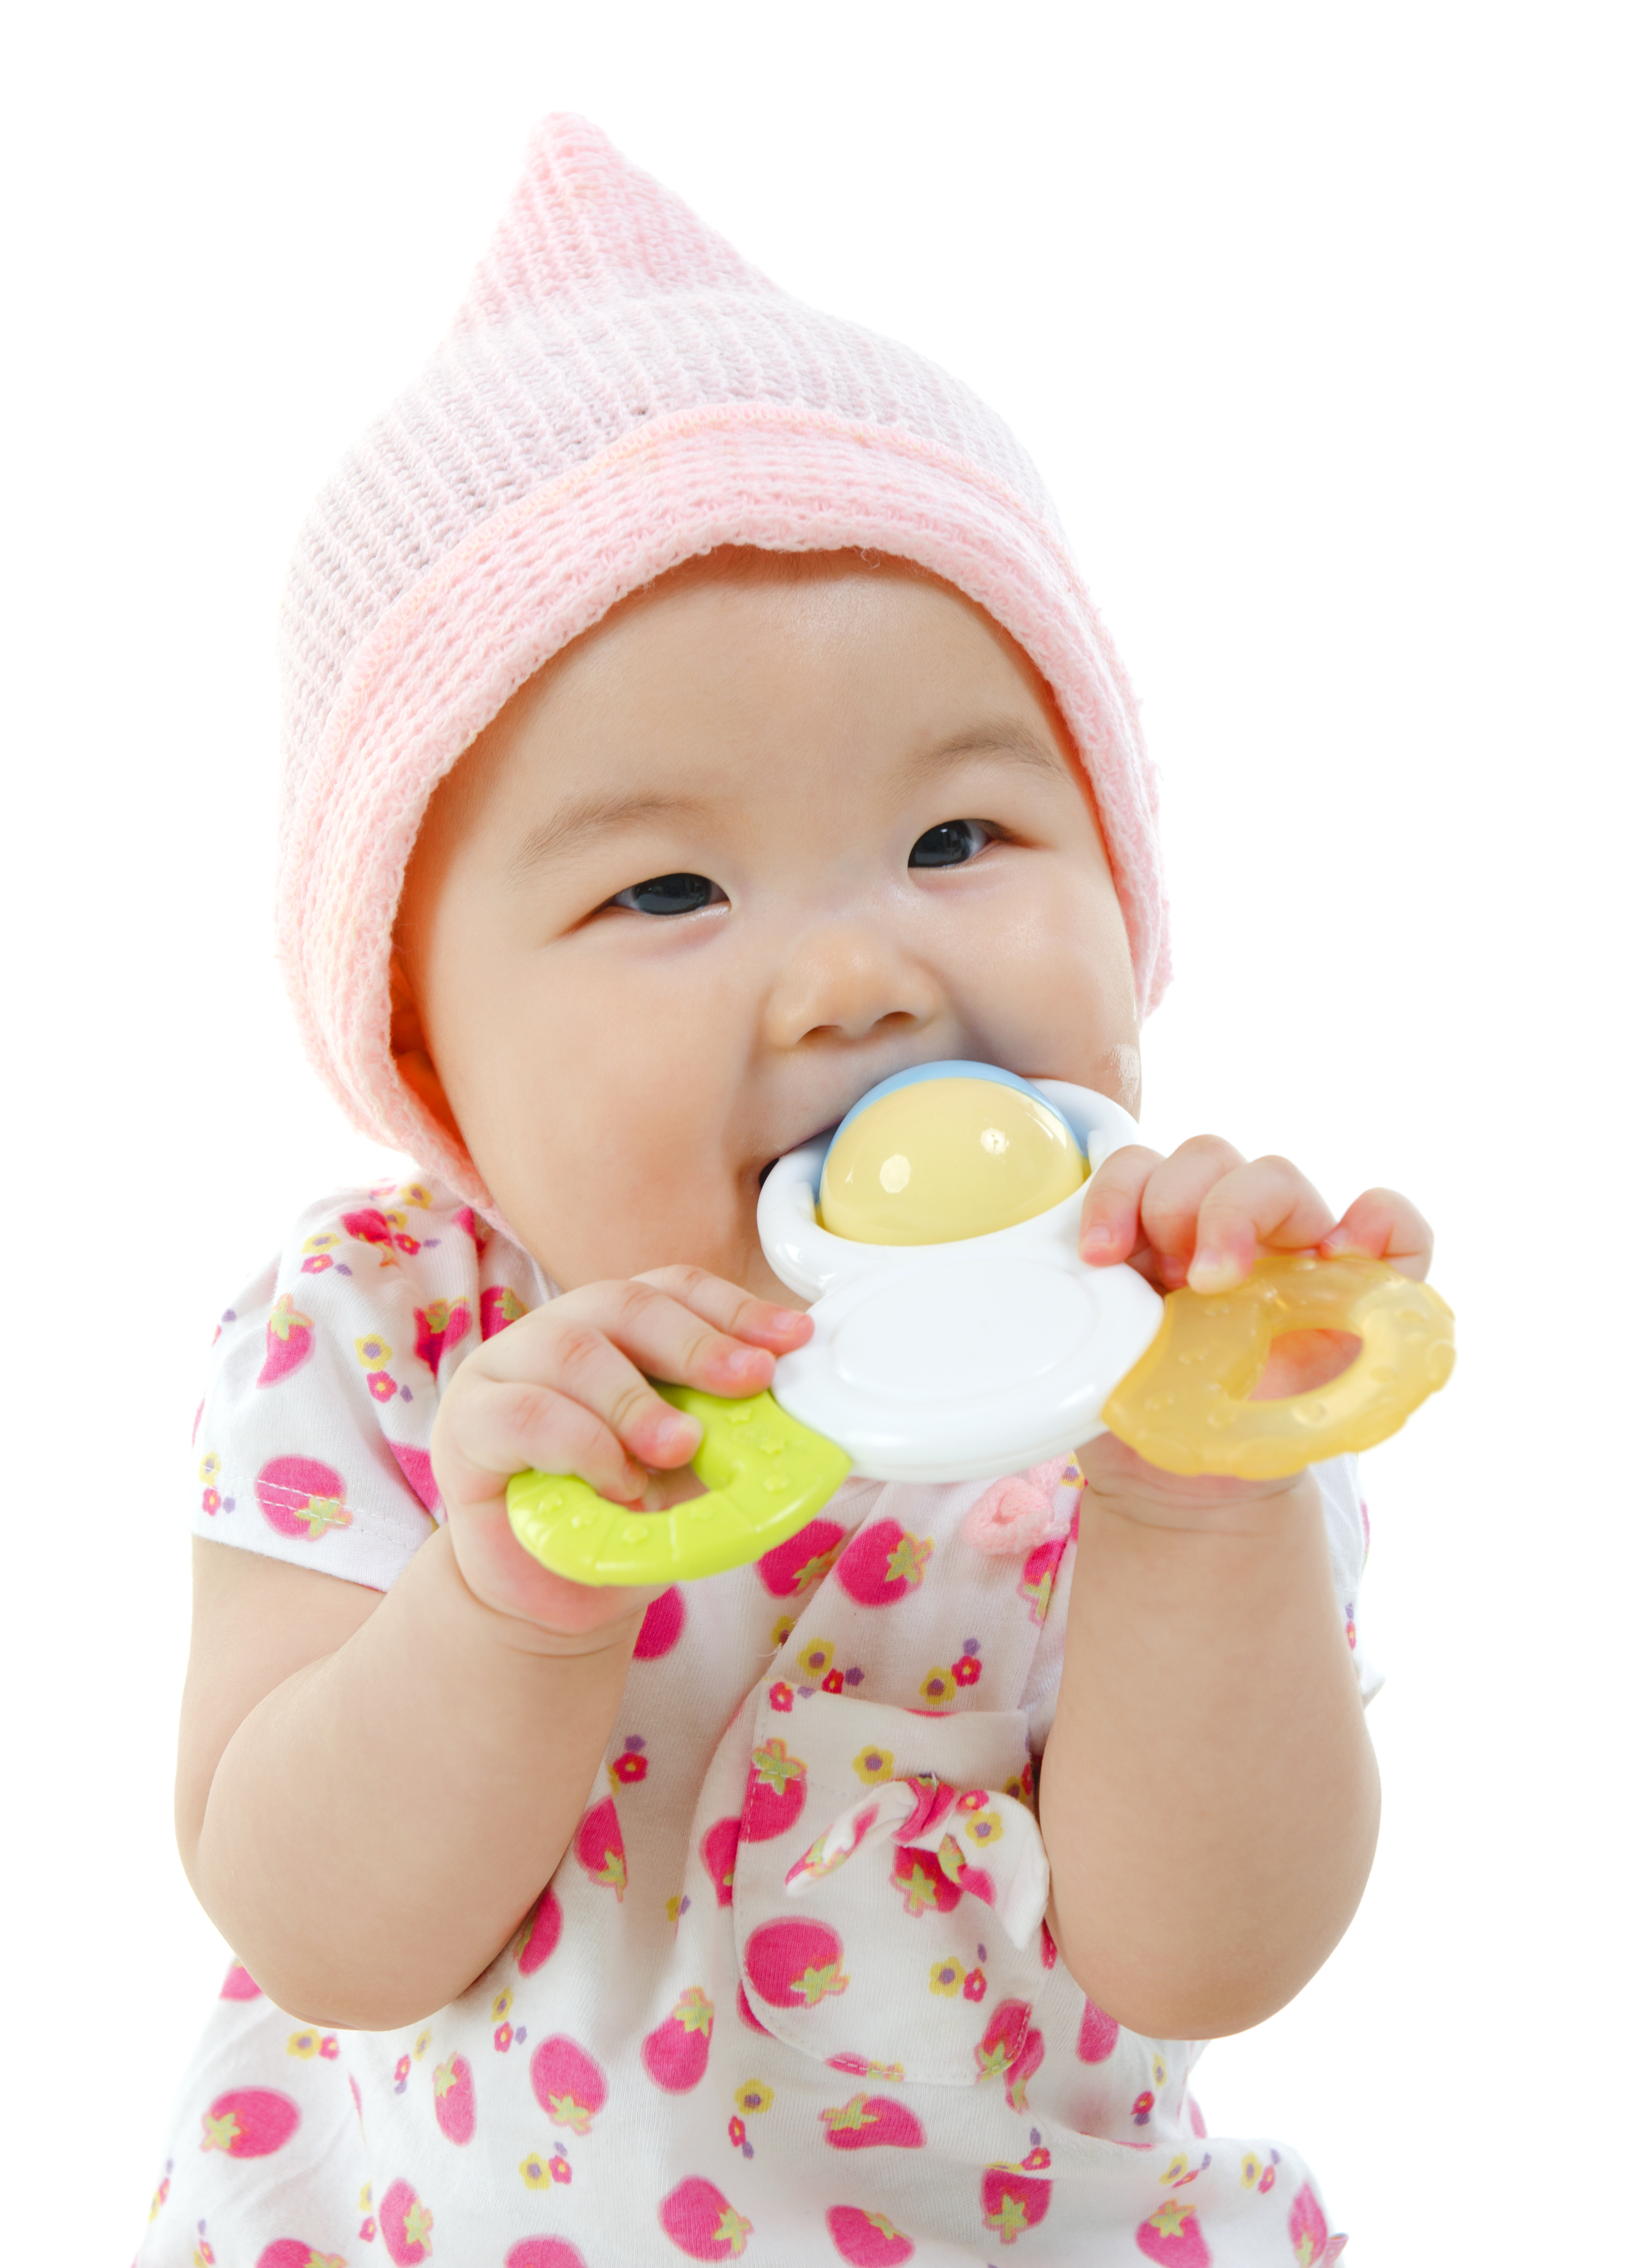 Toxics_baby_with_toy_istock-000020745937_Large.jpg